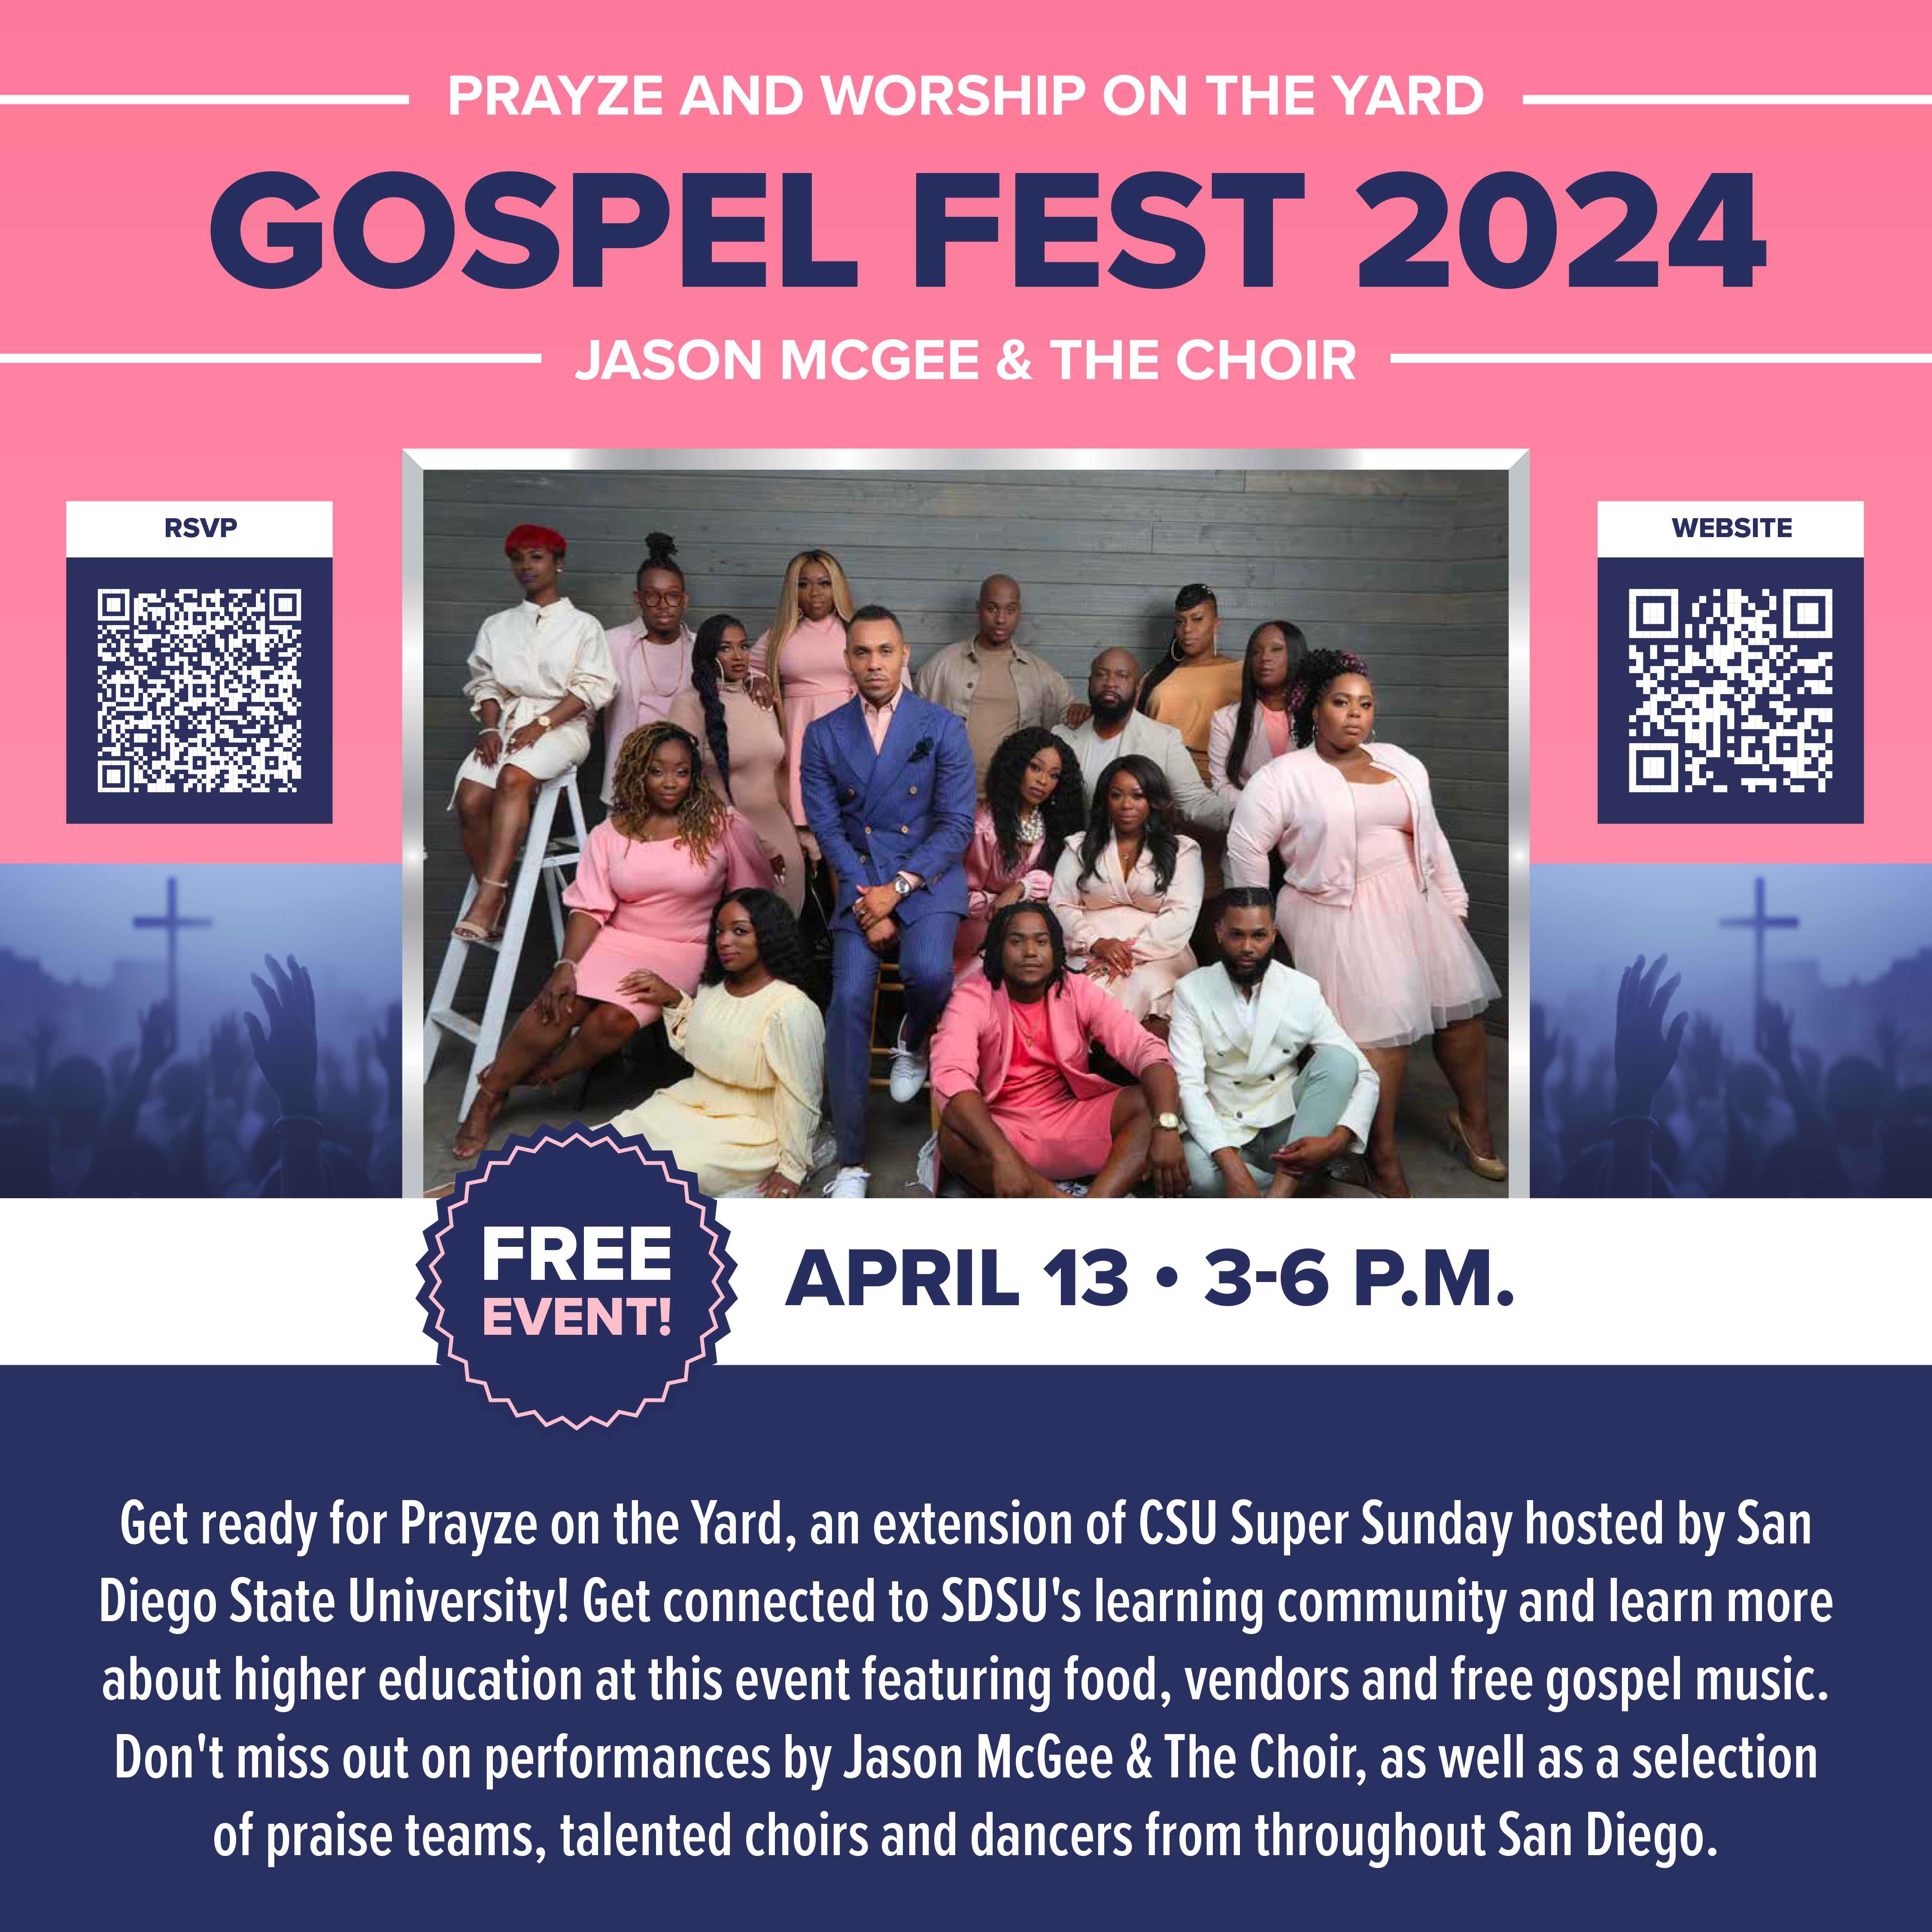 Group photo of Jason McGee and the Choir dressed in purple and pink.